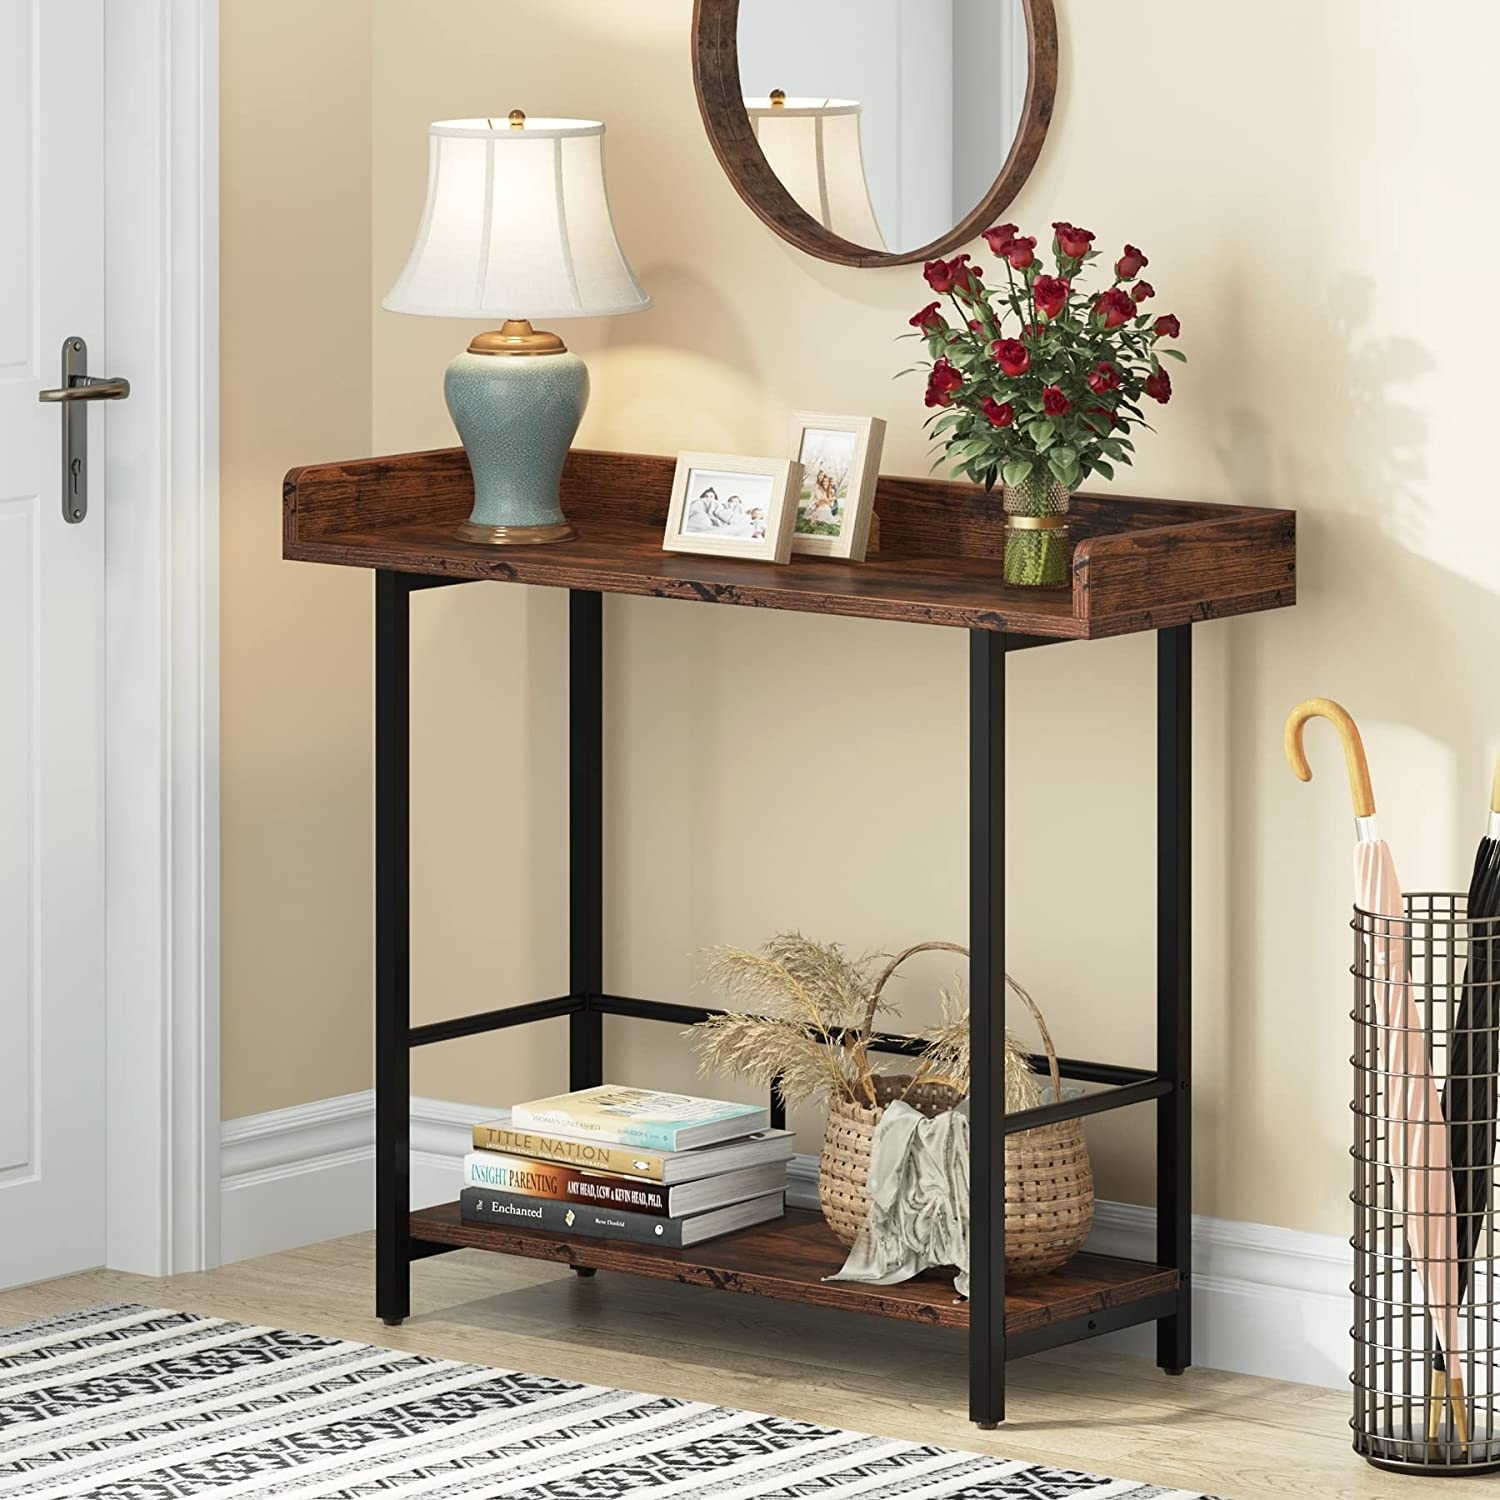 Rustic Industrial Deco Narrow Console Sofa Table Hallway Living Room Small Space 